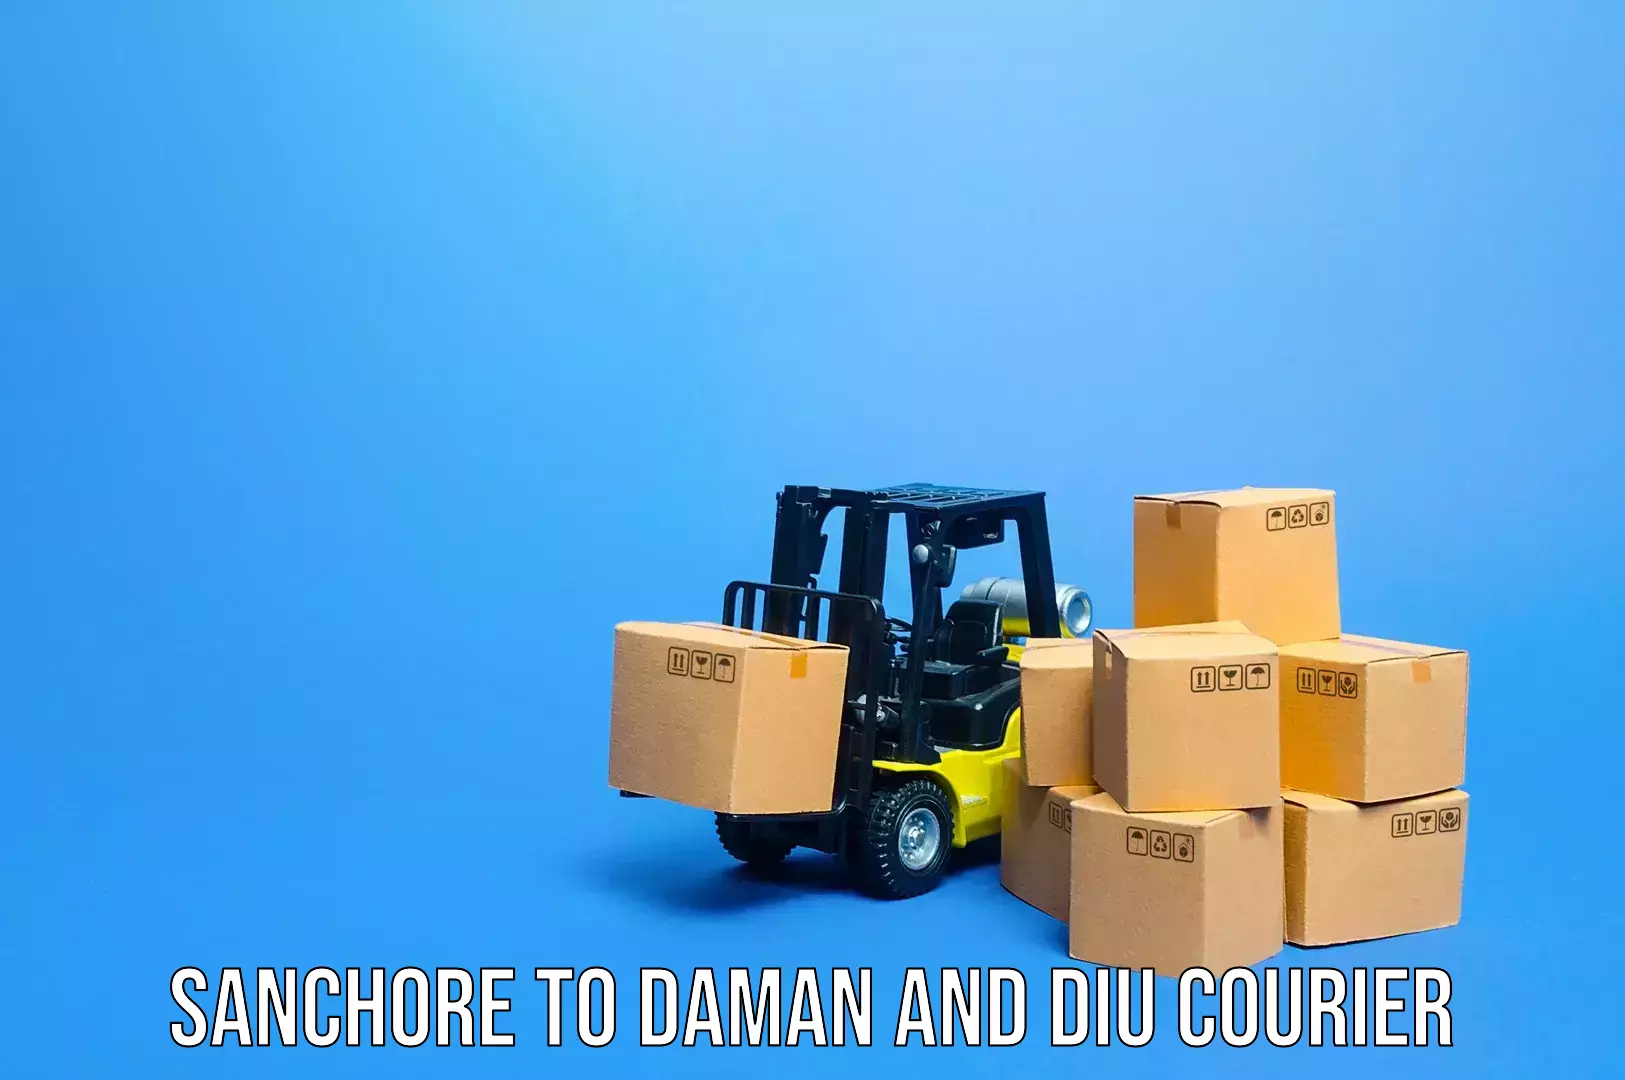 Luggage transport operations Sanchore to Daman and Diu